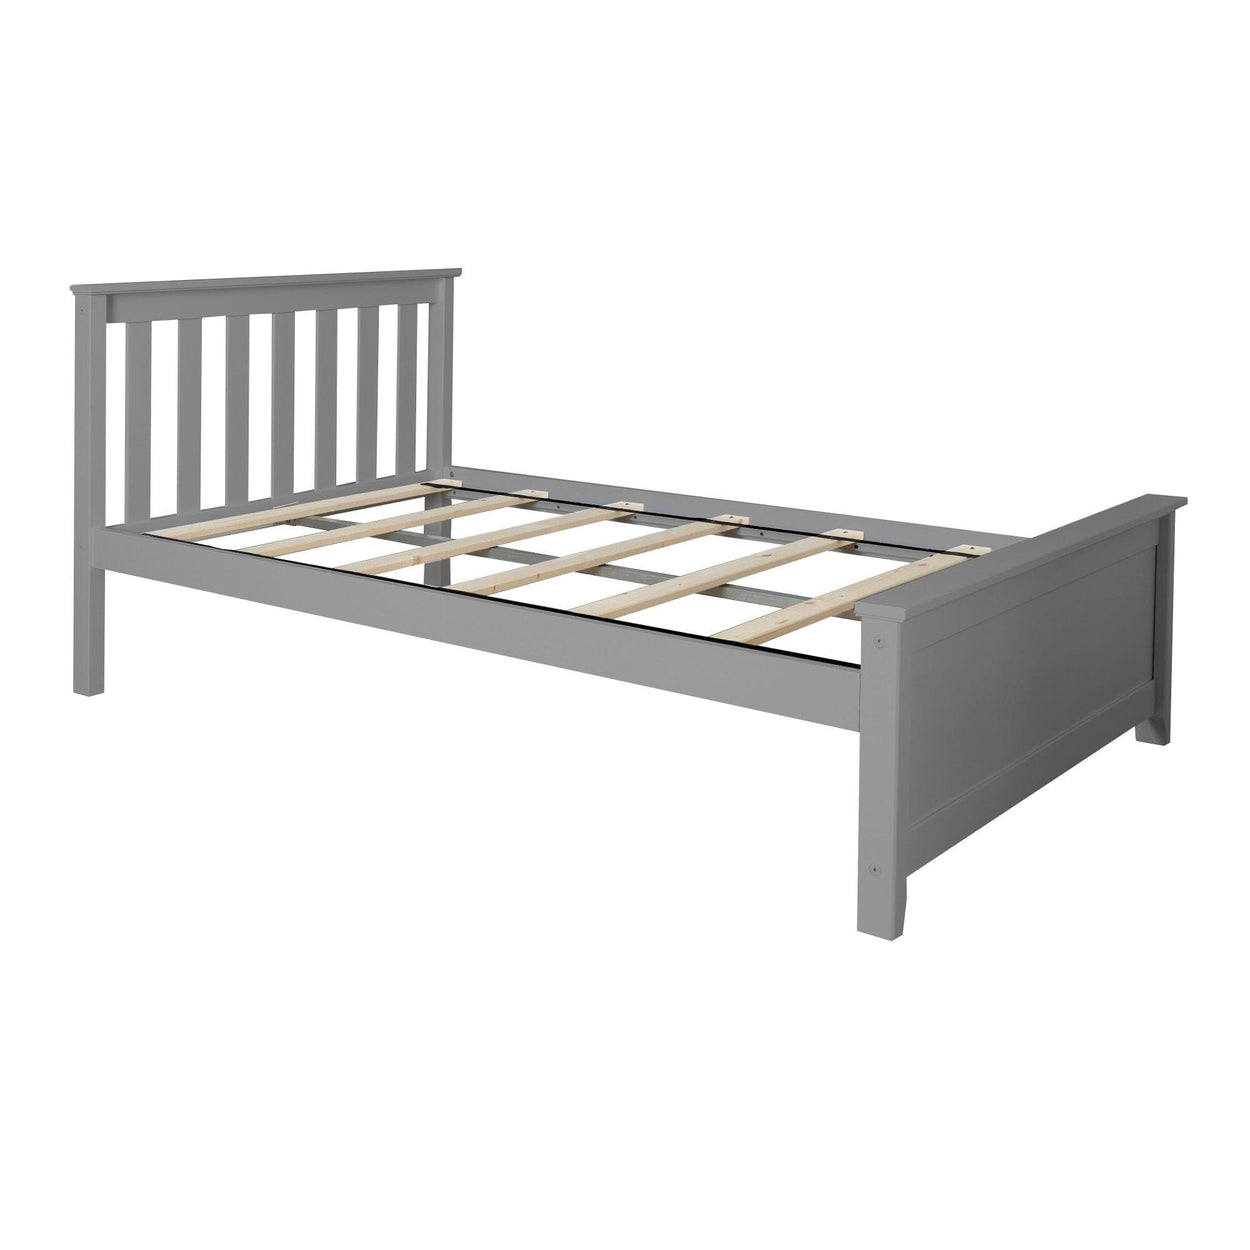 180210-121 : Kids Beds Classic Twin-Size Platform Bed, Grey